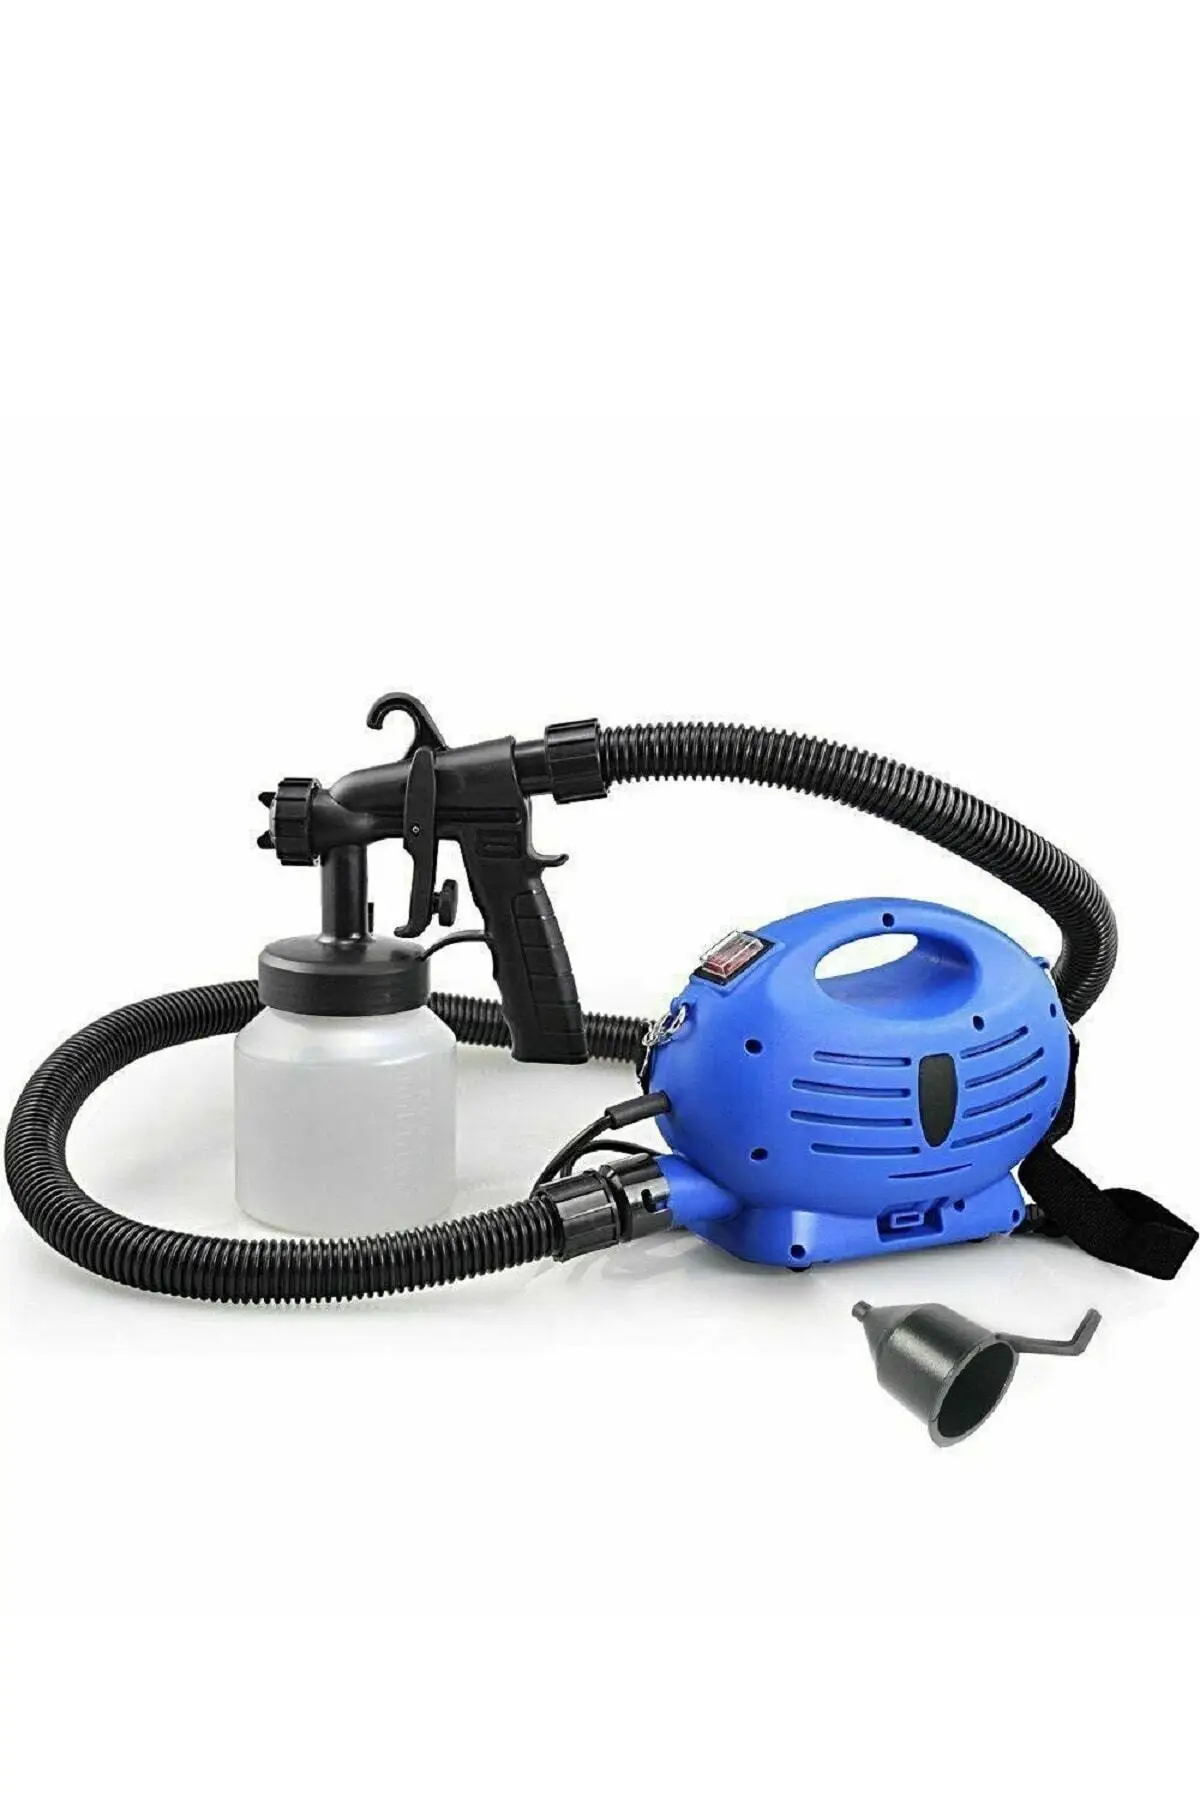 Paint Gun New Generation Multifunctional Pfs 2000 440 W Car Wash Painting Air Compressor Very Convenient And High Power